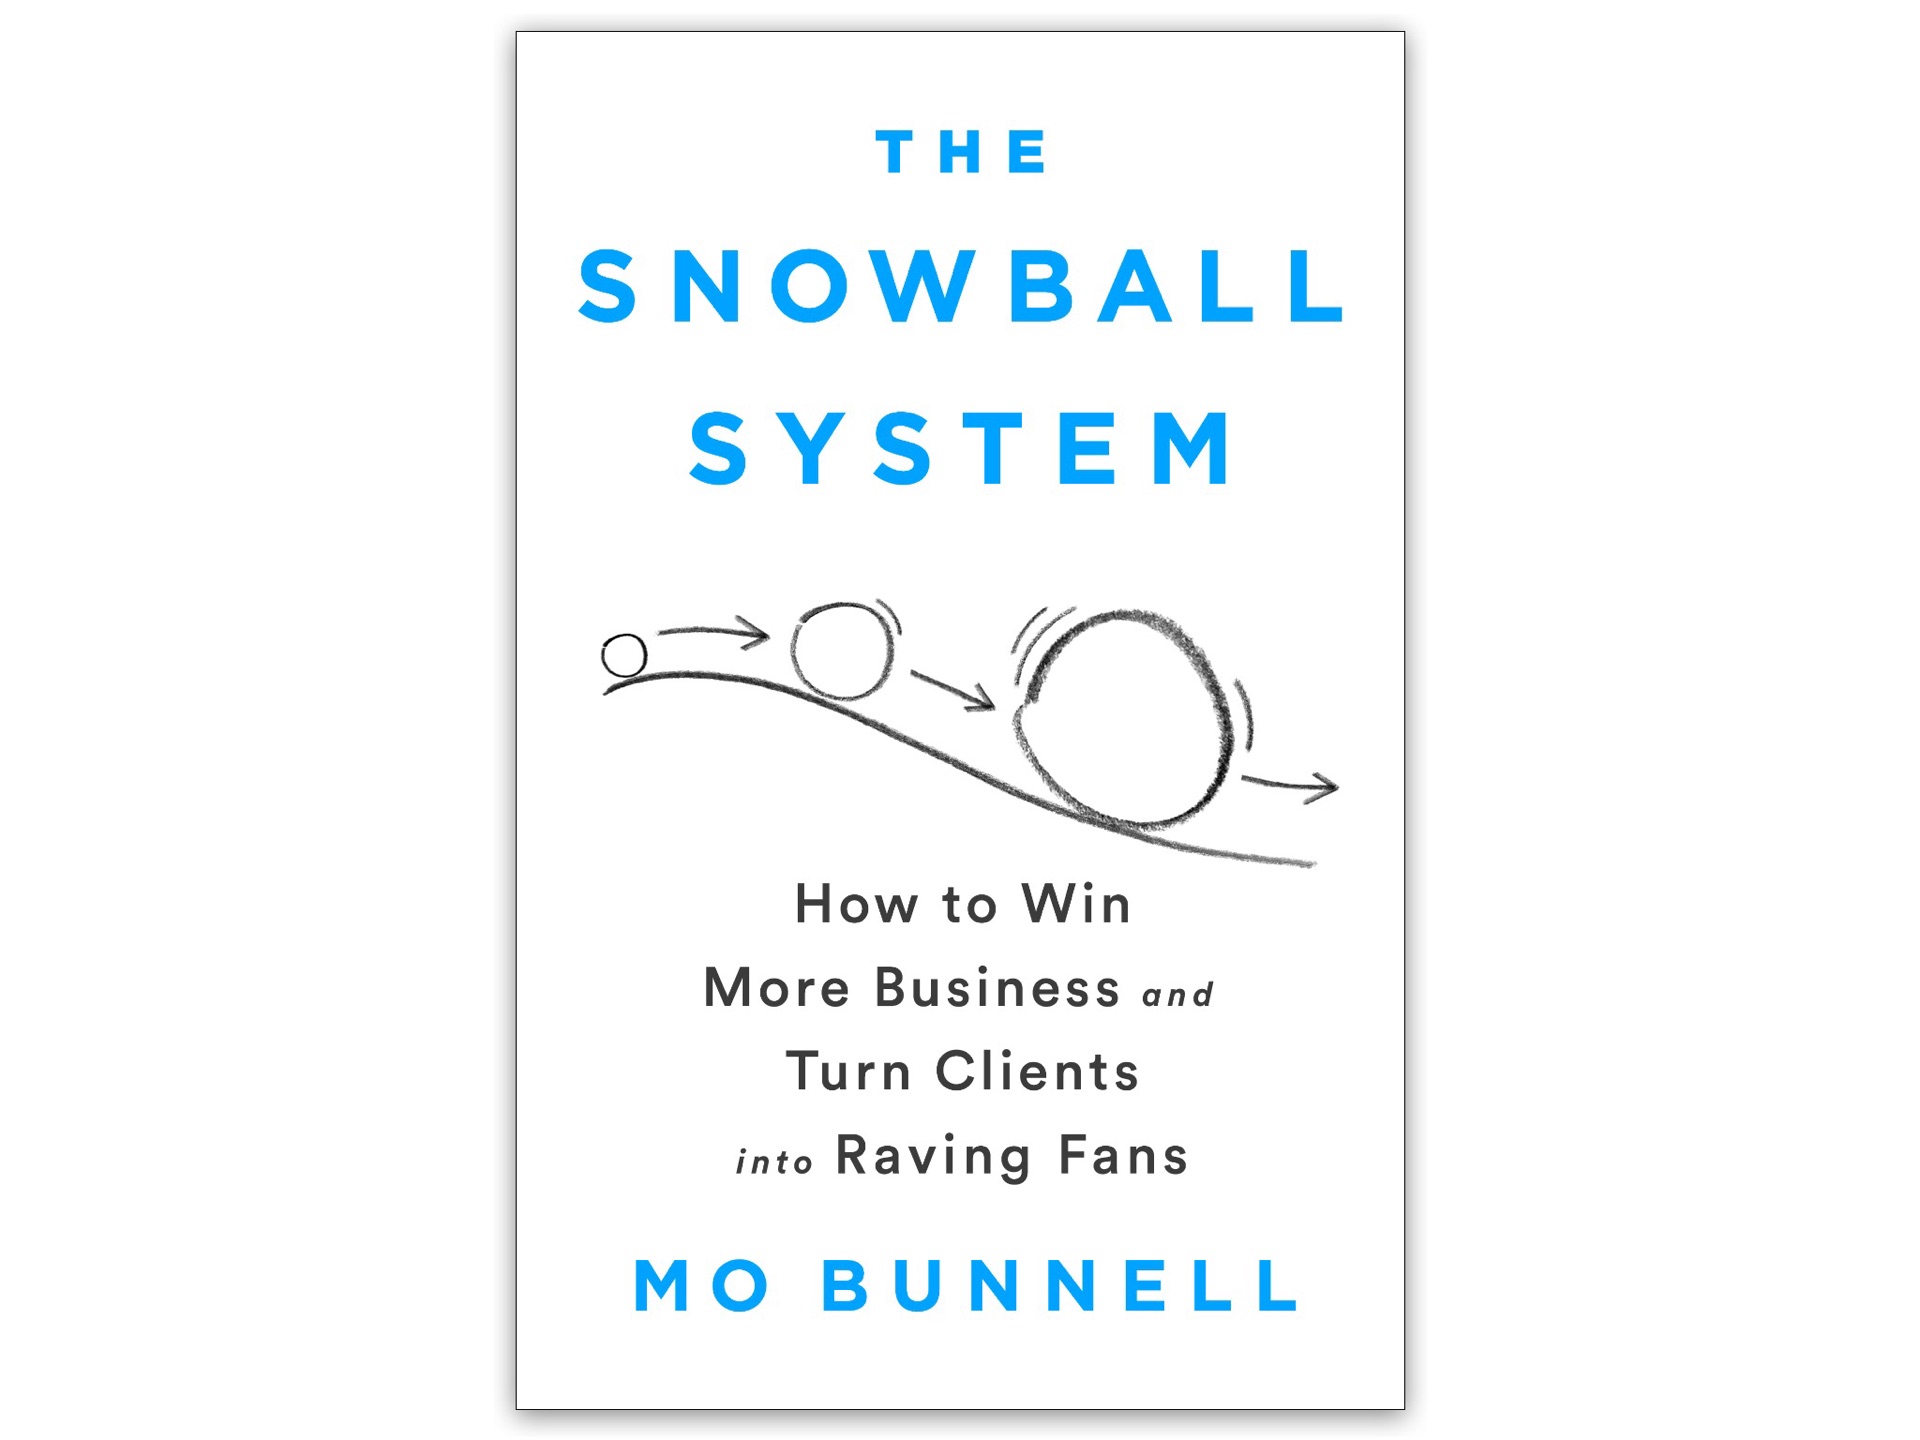 The Snowball System by Mo Bunnell.